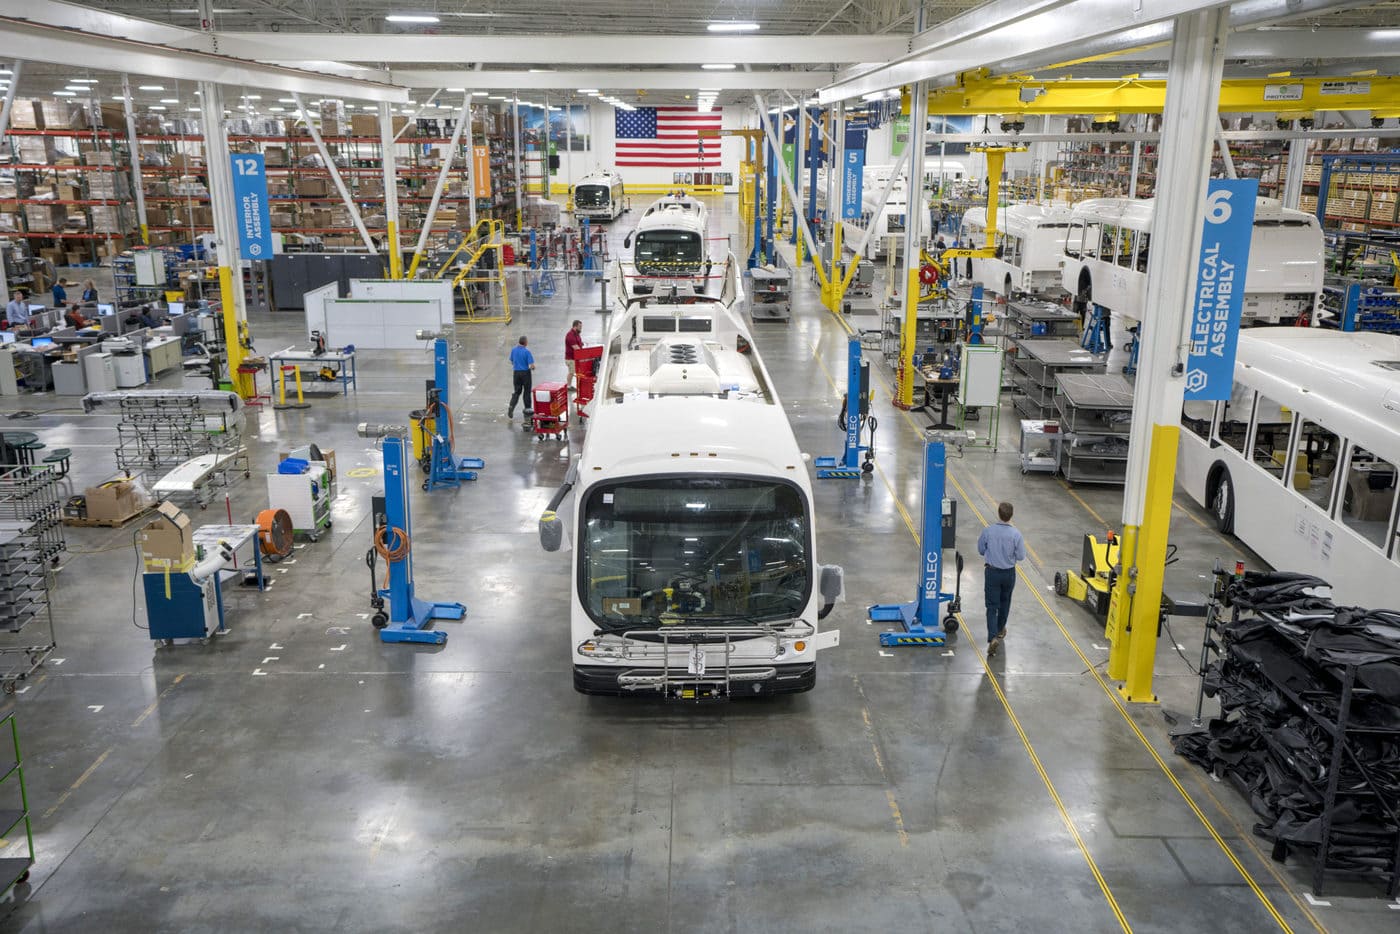 Electric buses line up in a brightly lit warehouse with an American flag in the background